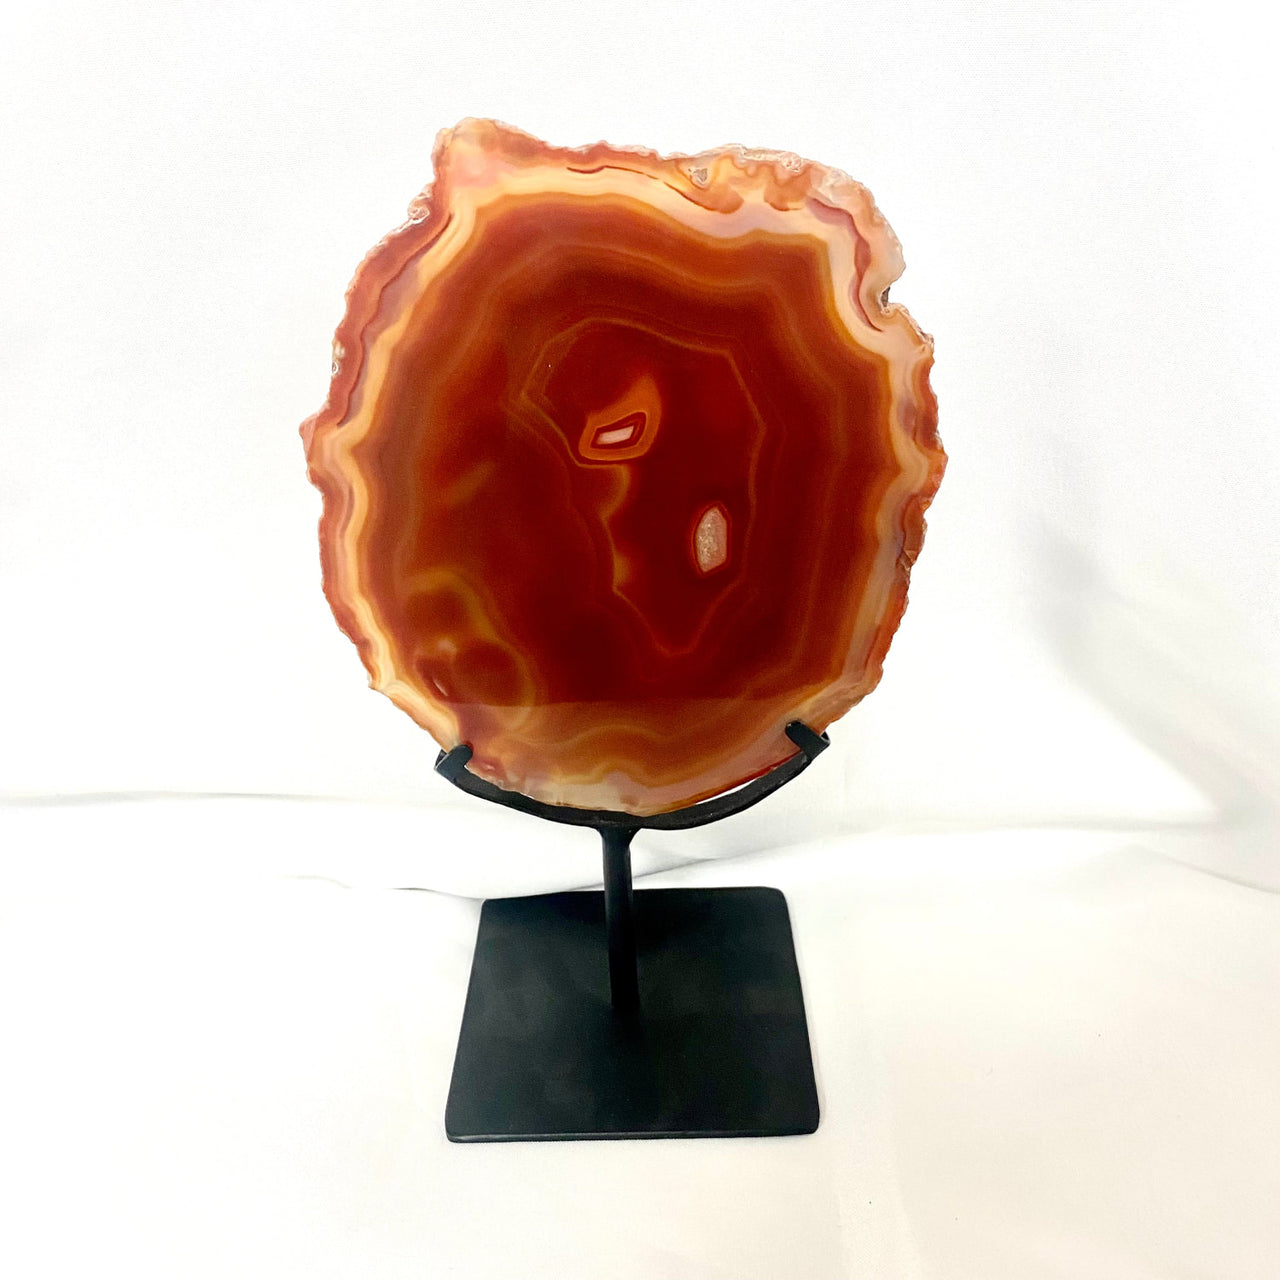 Flat shape Arafed Agate Slice on black metal stand, product #M191, white background